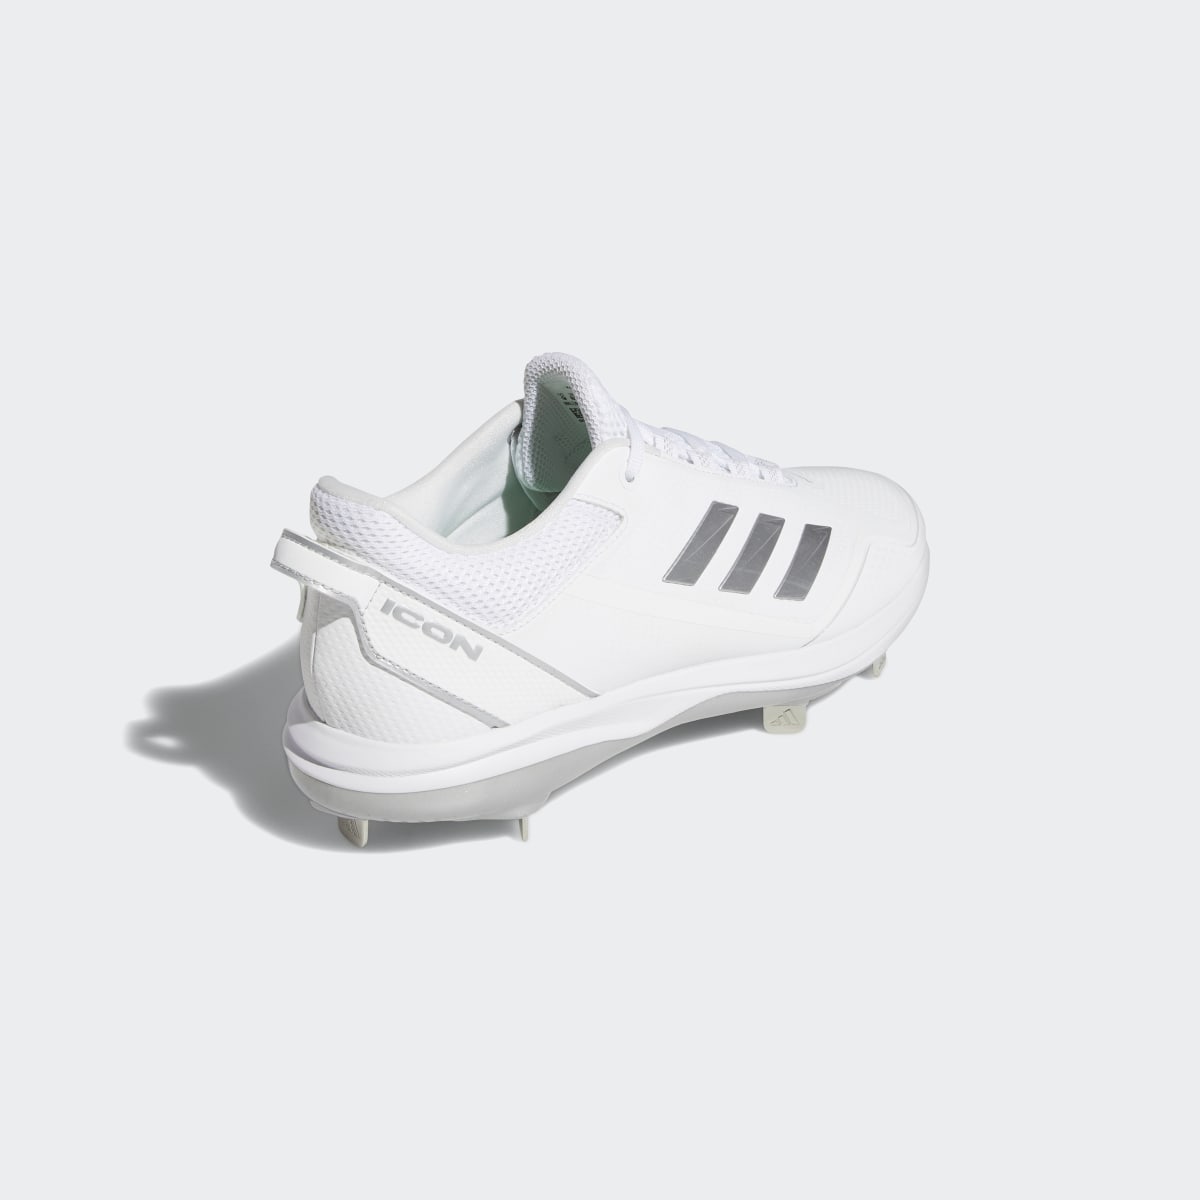 Adidas Icon 7 Cleats. 6